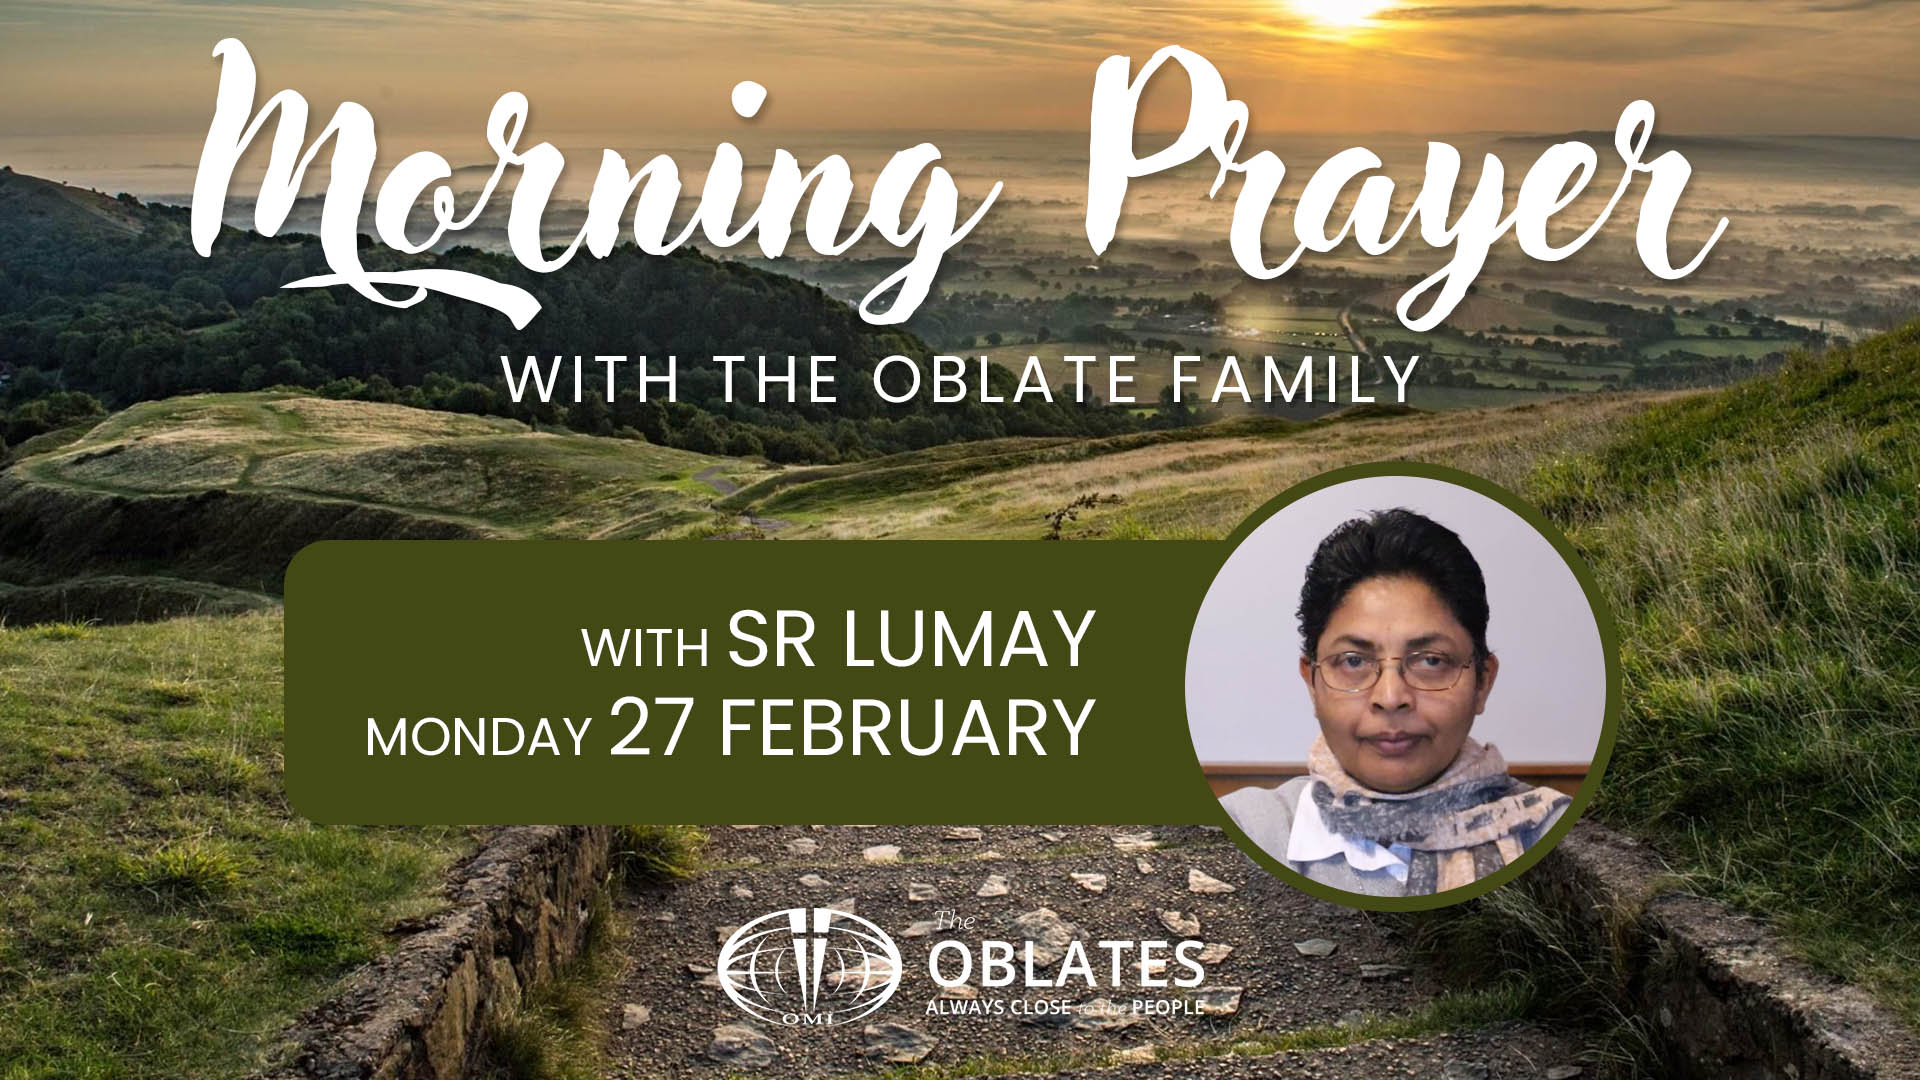 Morning Prayer for February 27th - Missionary Oblates of Mary Immaculate